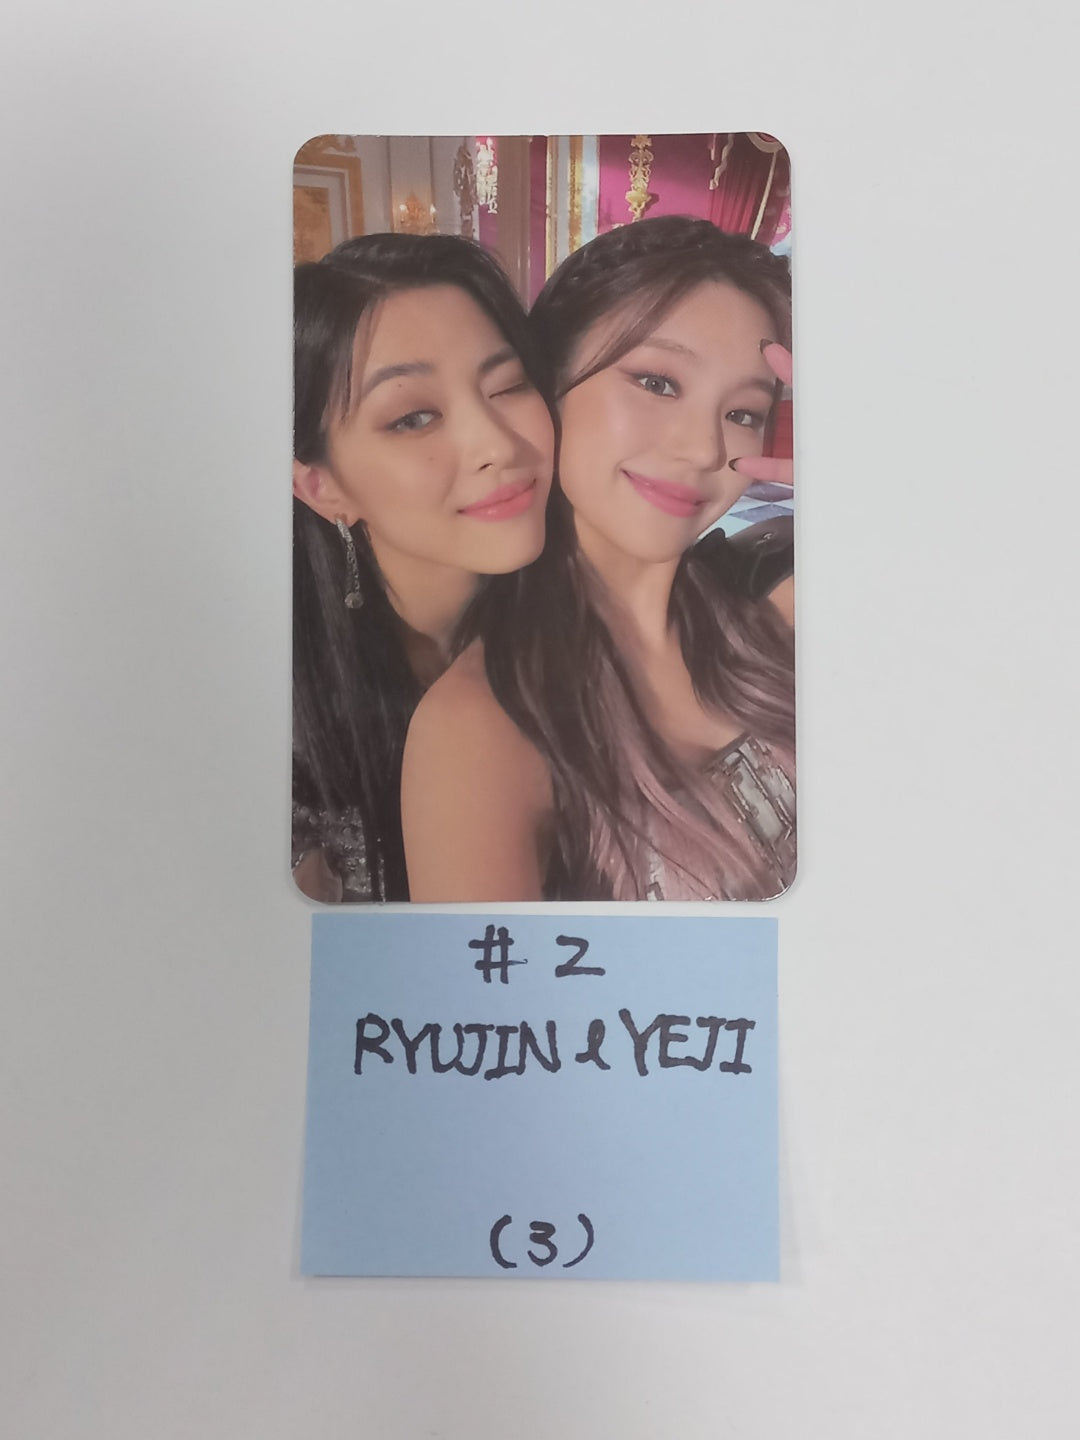 ITZY 'CHECKMATE' - Special Edition Photocard, Postcard + Seal Sticker